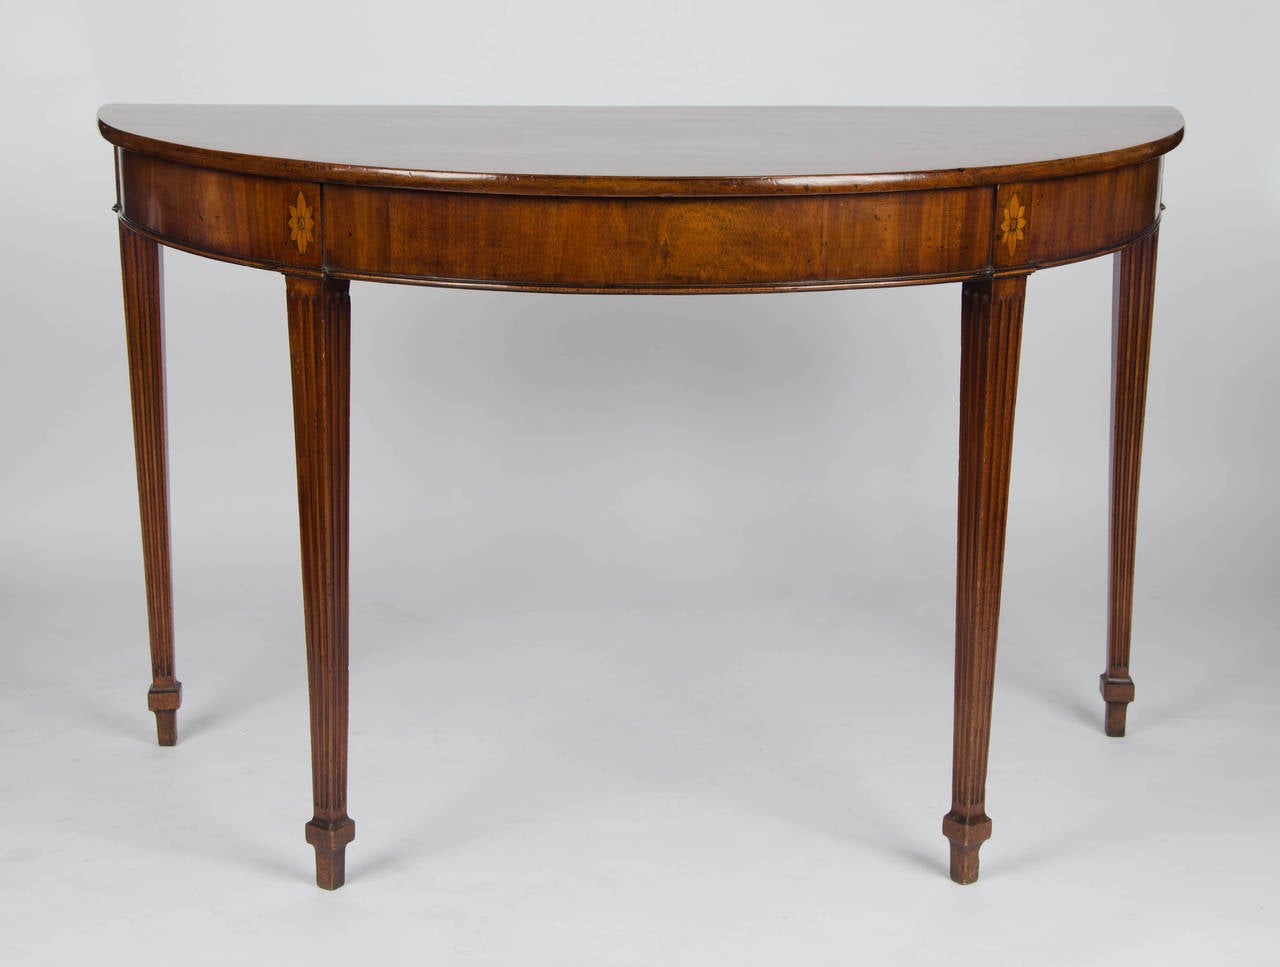 George III An 18th century mahogany demi-lune side, console or serving table.